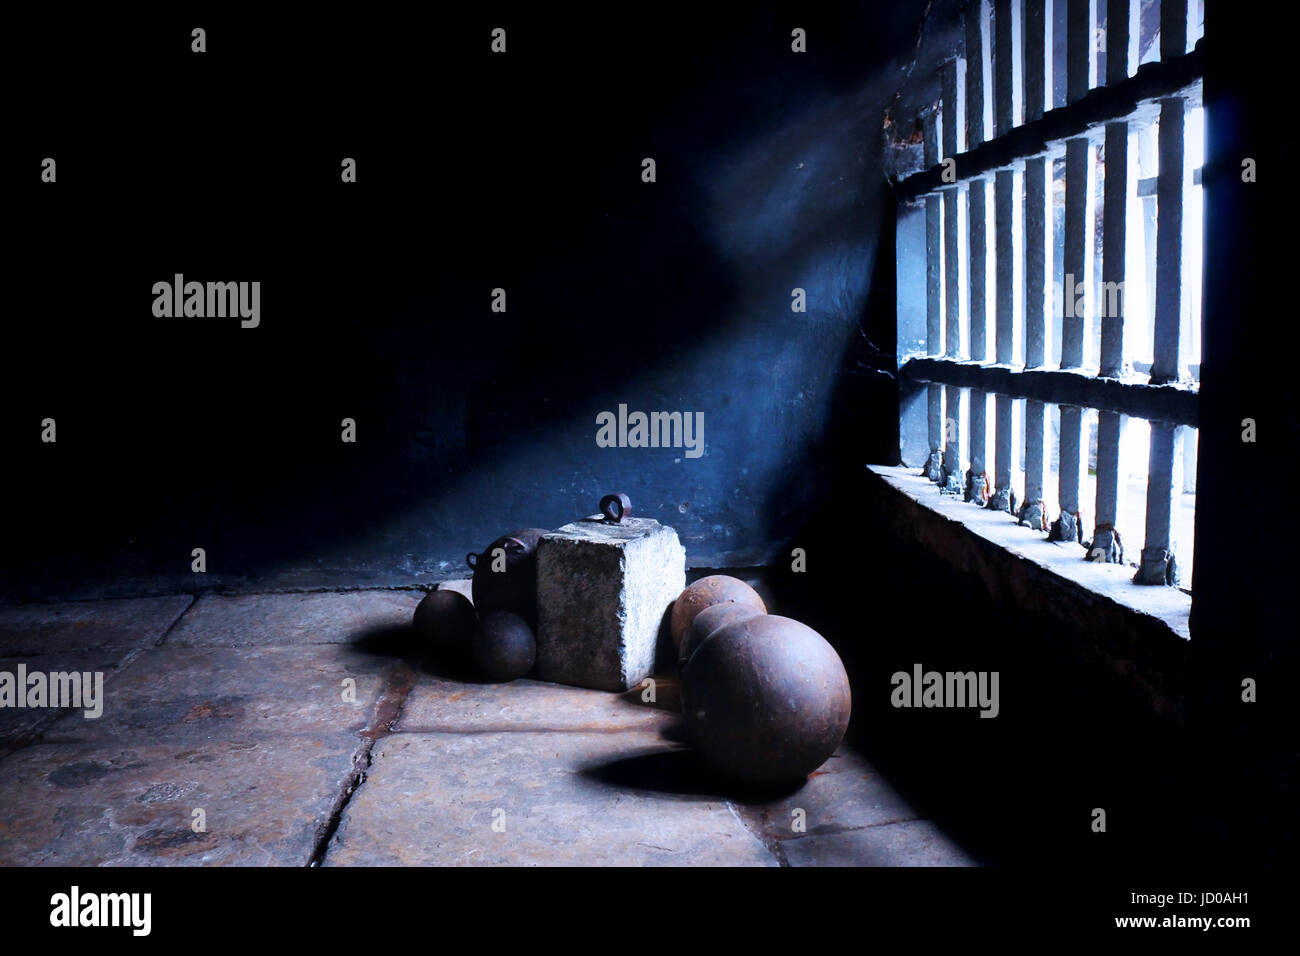 Iron balls and a concrete block shackles in an old colonial styled prison under a historical building in Old Town, Jakarta, Indonesia. Stock Photo